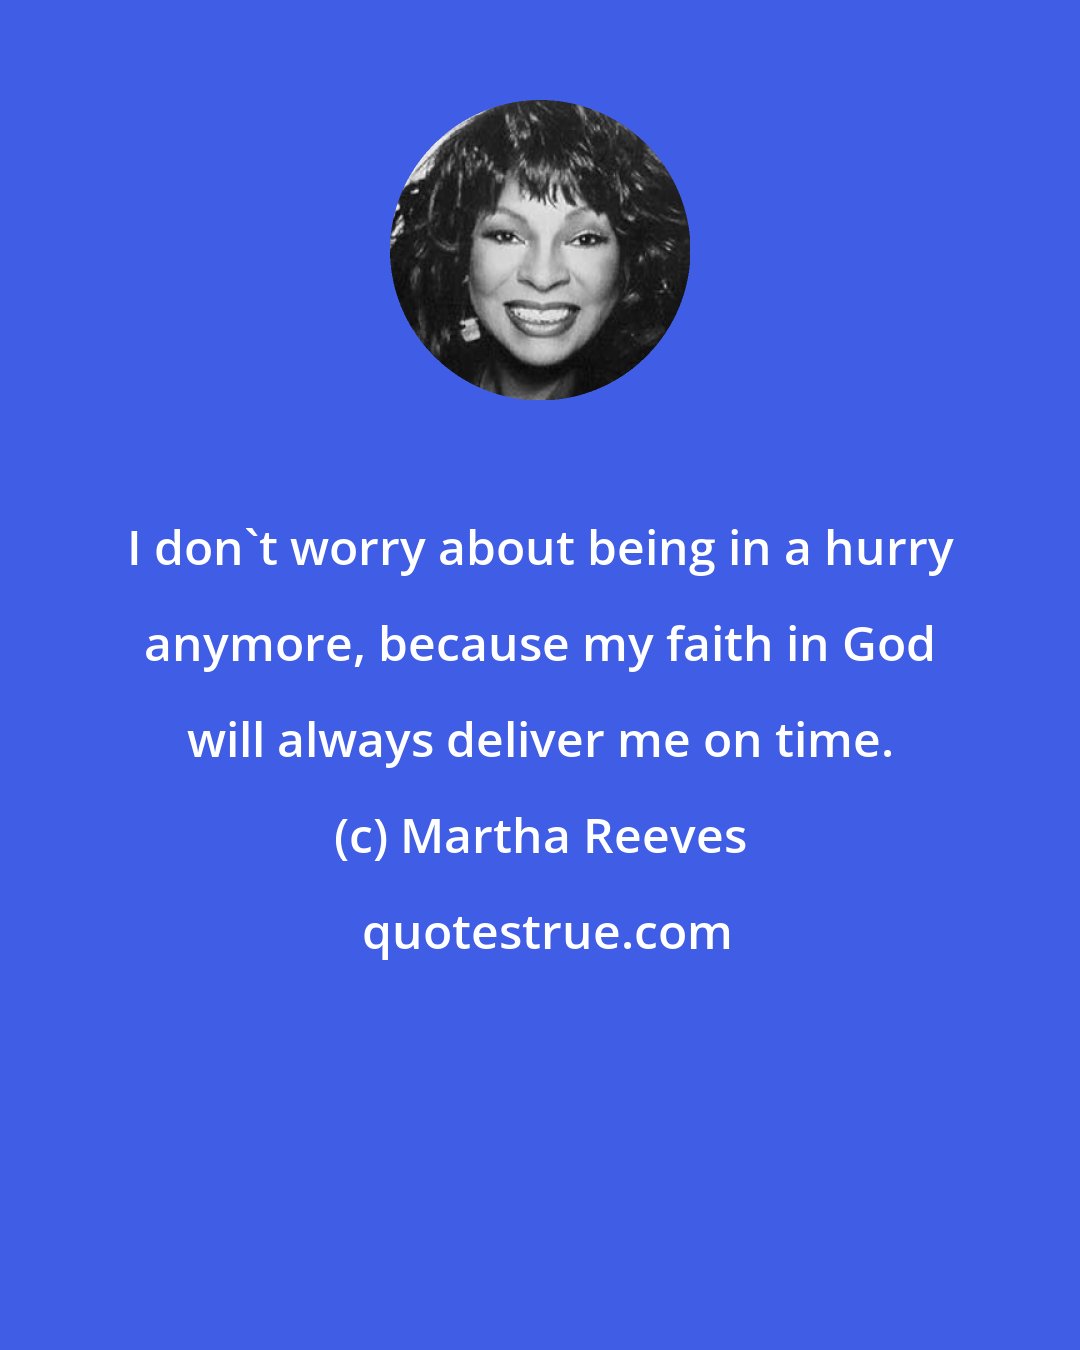 Martha Reeves: I don't worry about being in a hurry anymore, because my faith in God will always deliver me on time.